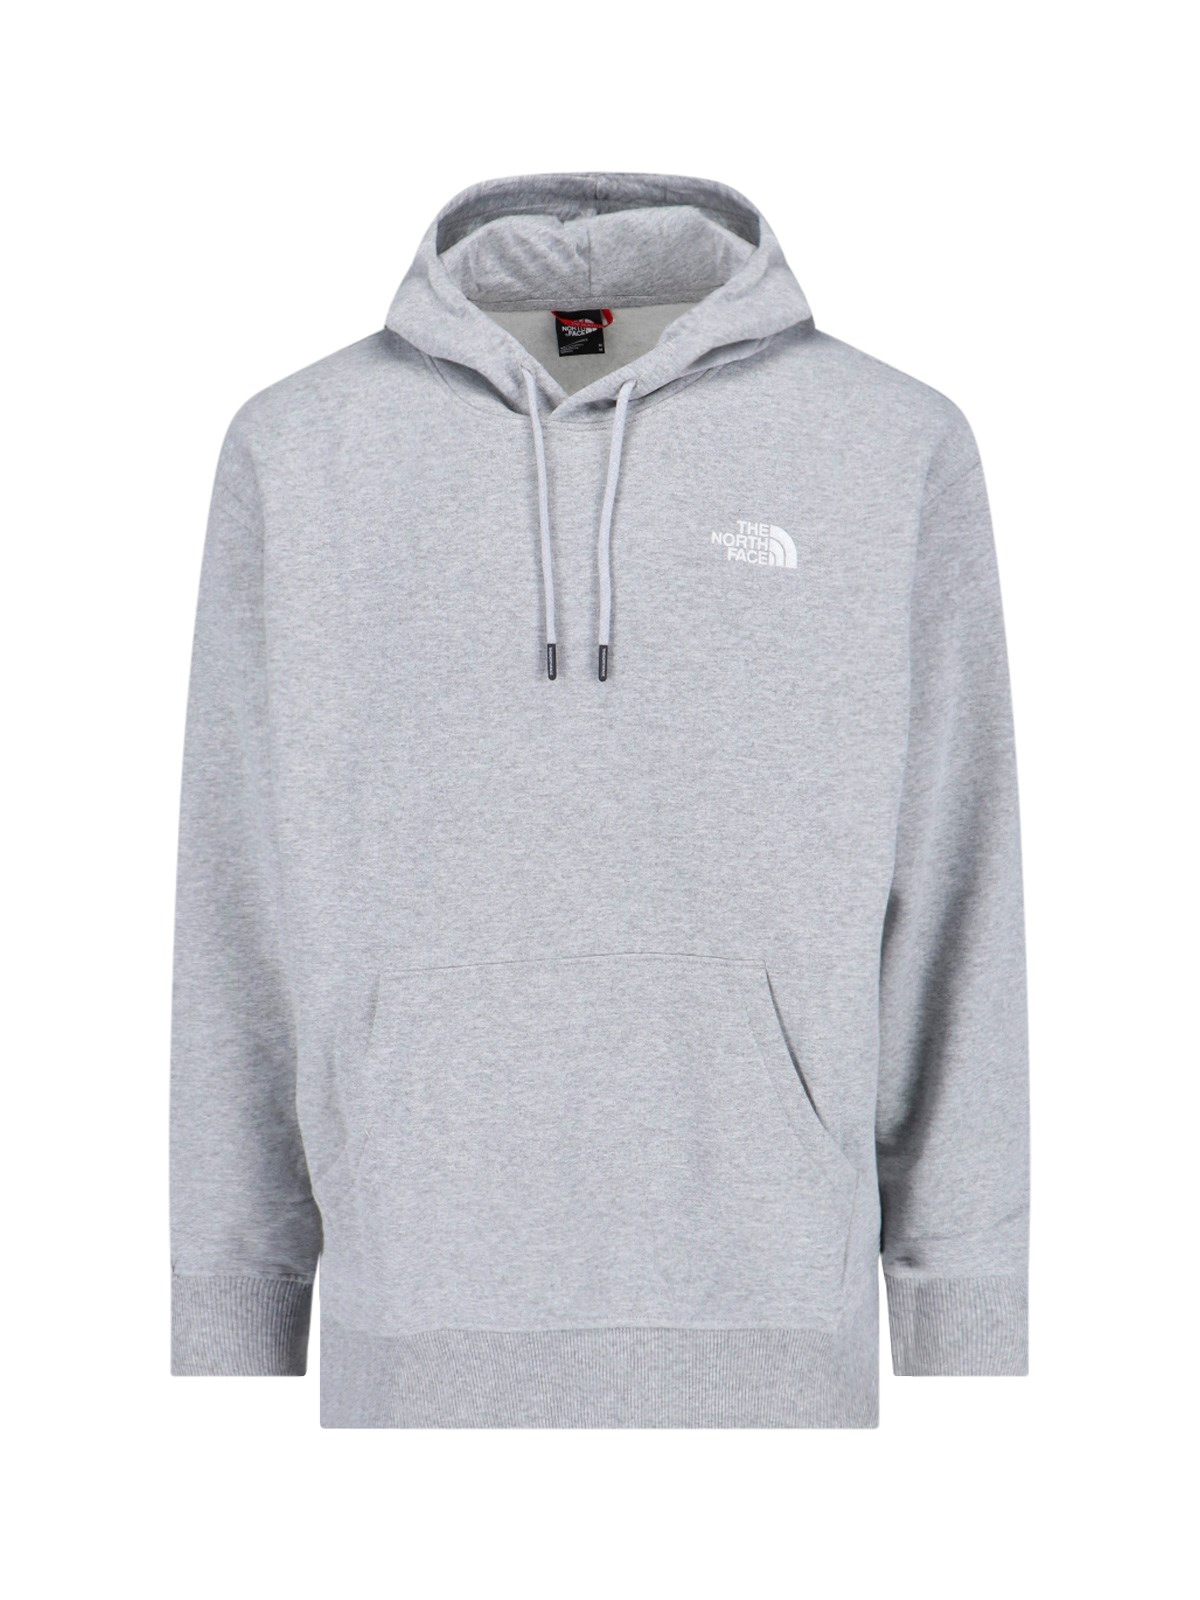 The North Face Logo Hoodie In Grey